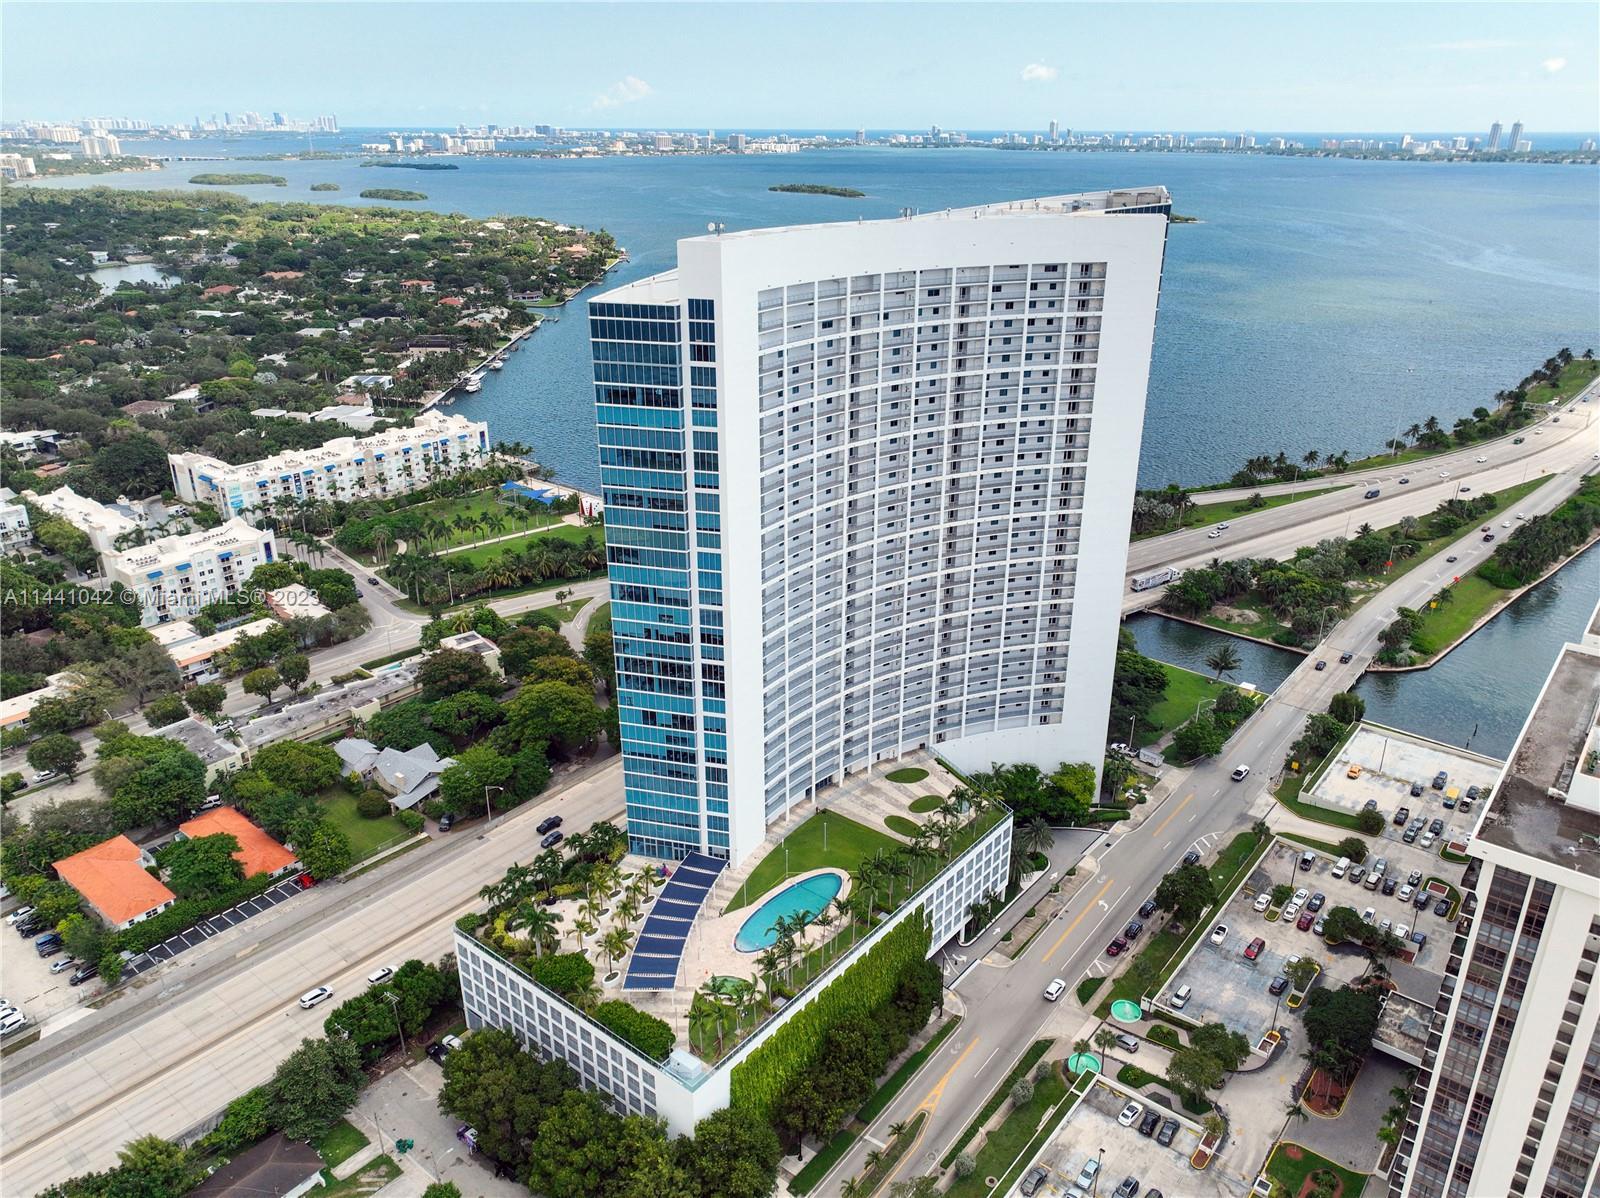 Beautiful 2 bed 2.5 bath condo on the 26th floor overlooking Biscayne Bay in the heart of Edgewater,